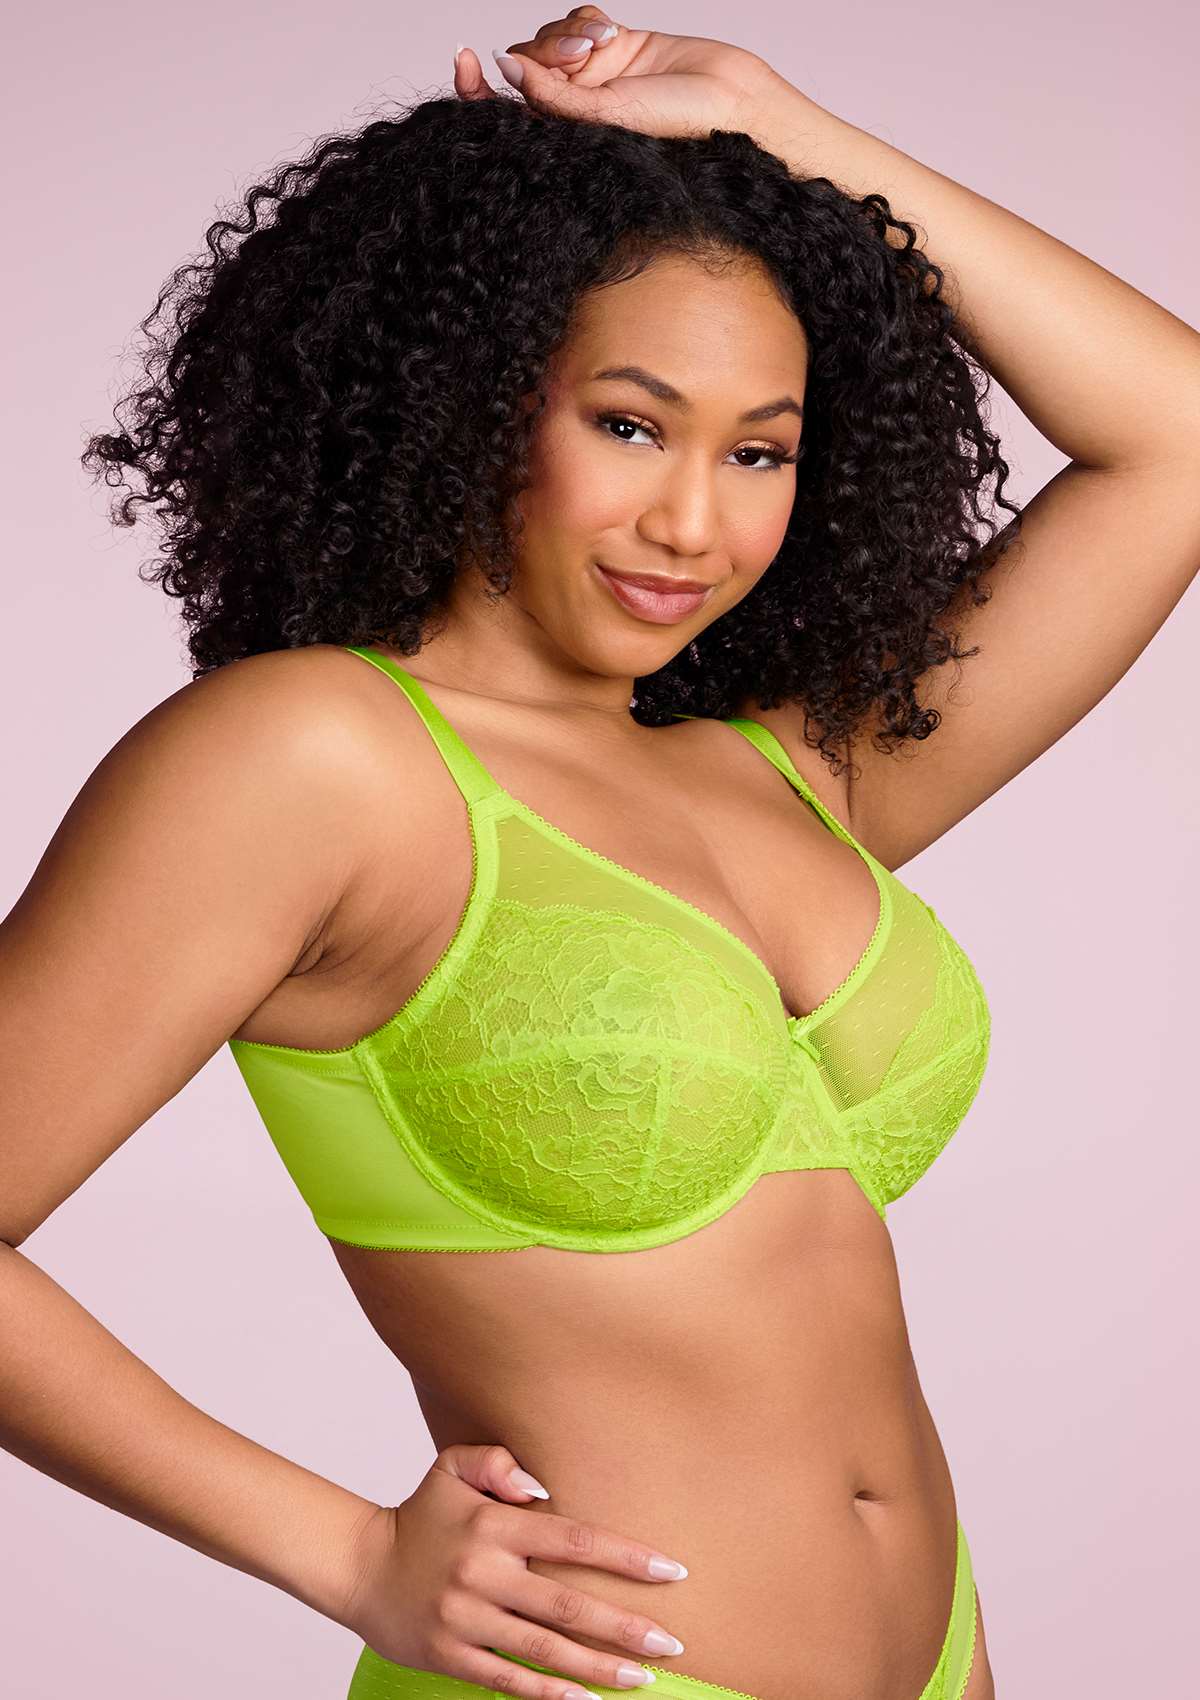 HSIA Enchante Full Cup Minimizing Bra: Supportive Unlined Lace Bra - Lime Green / 46 / C